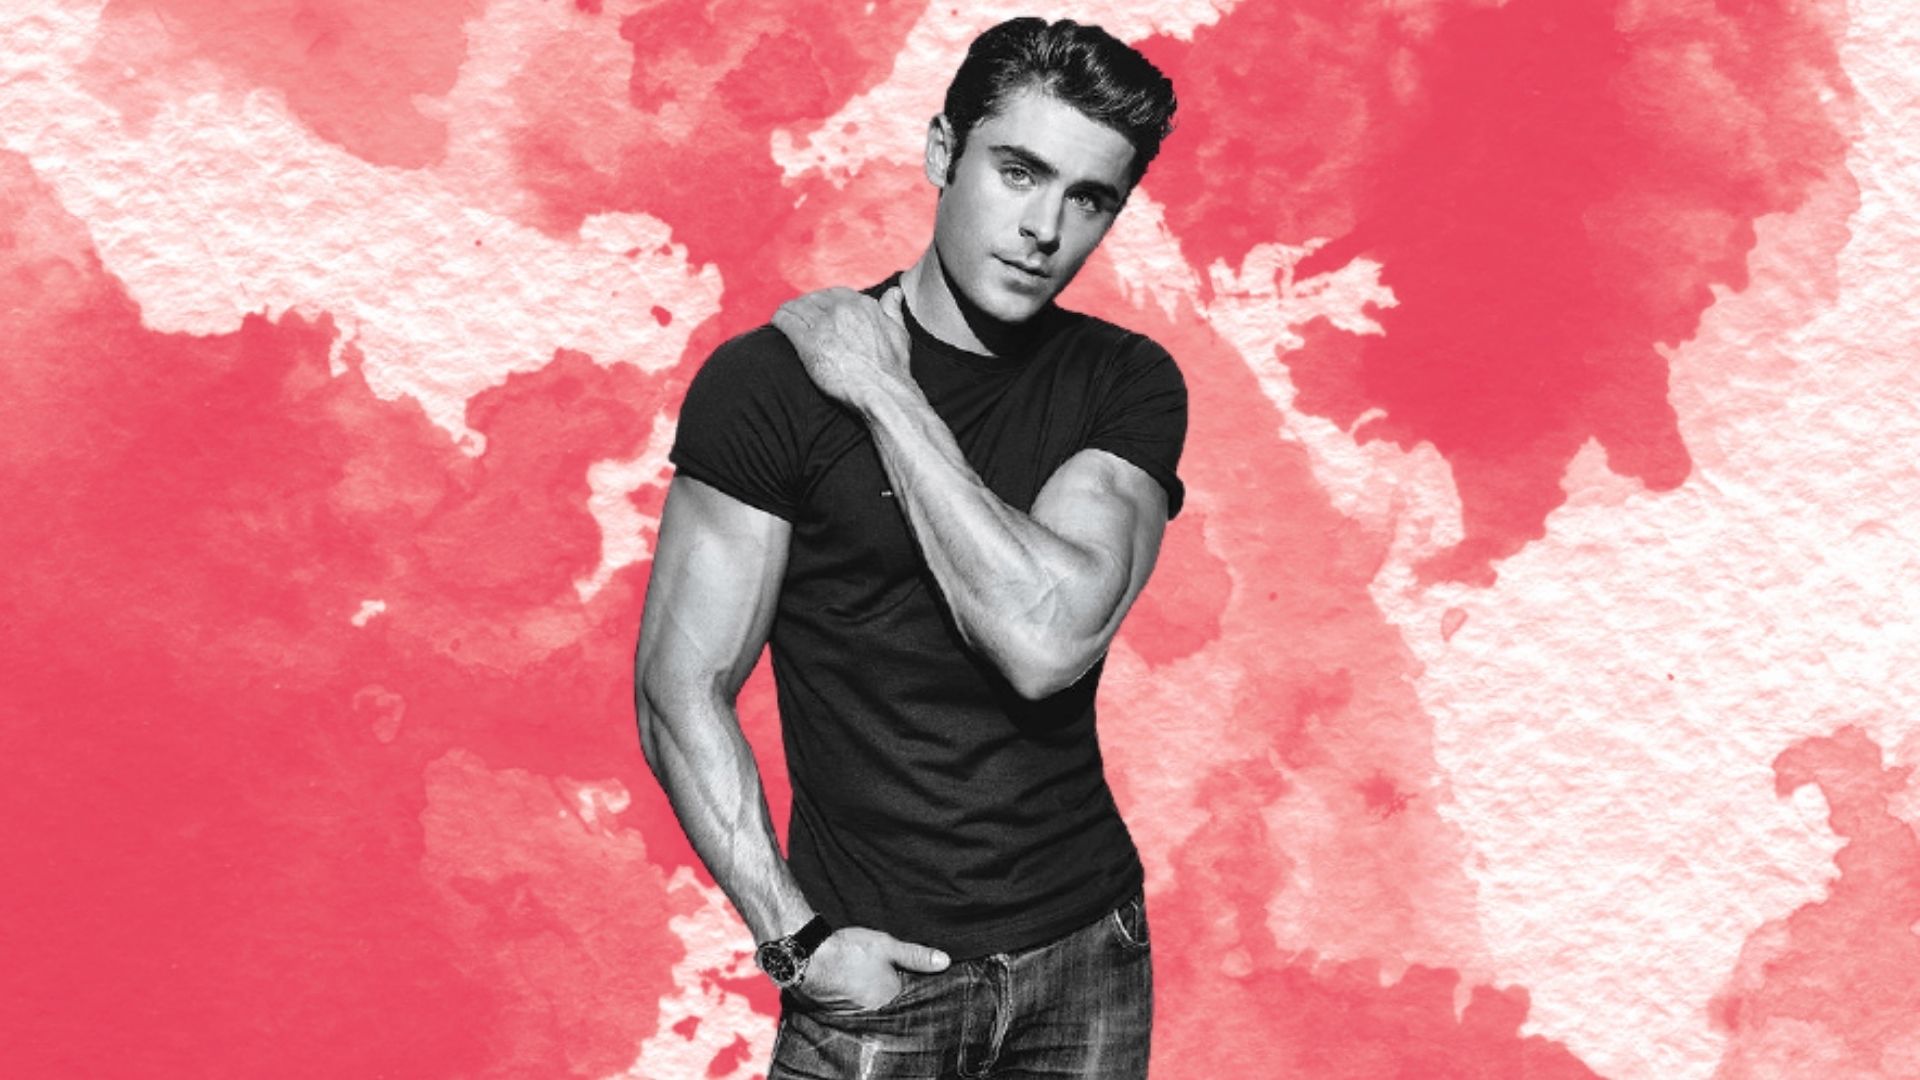 Zac Efron Steroids: Fact or Fiction?